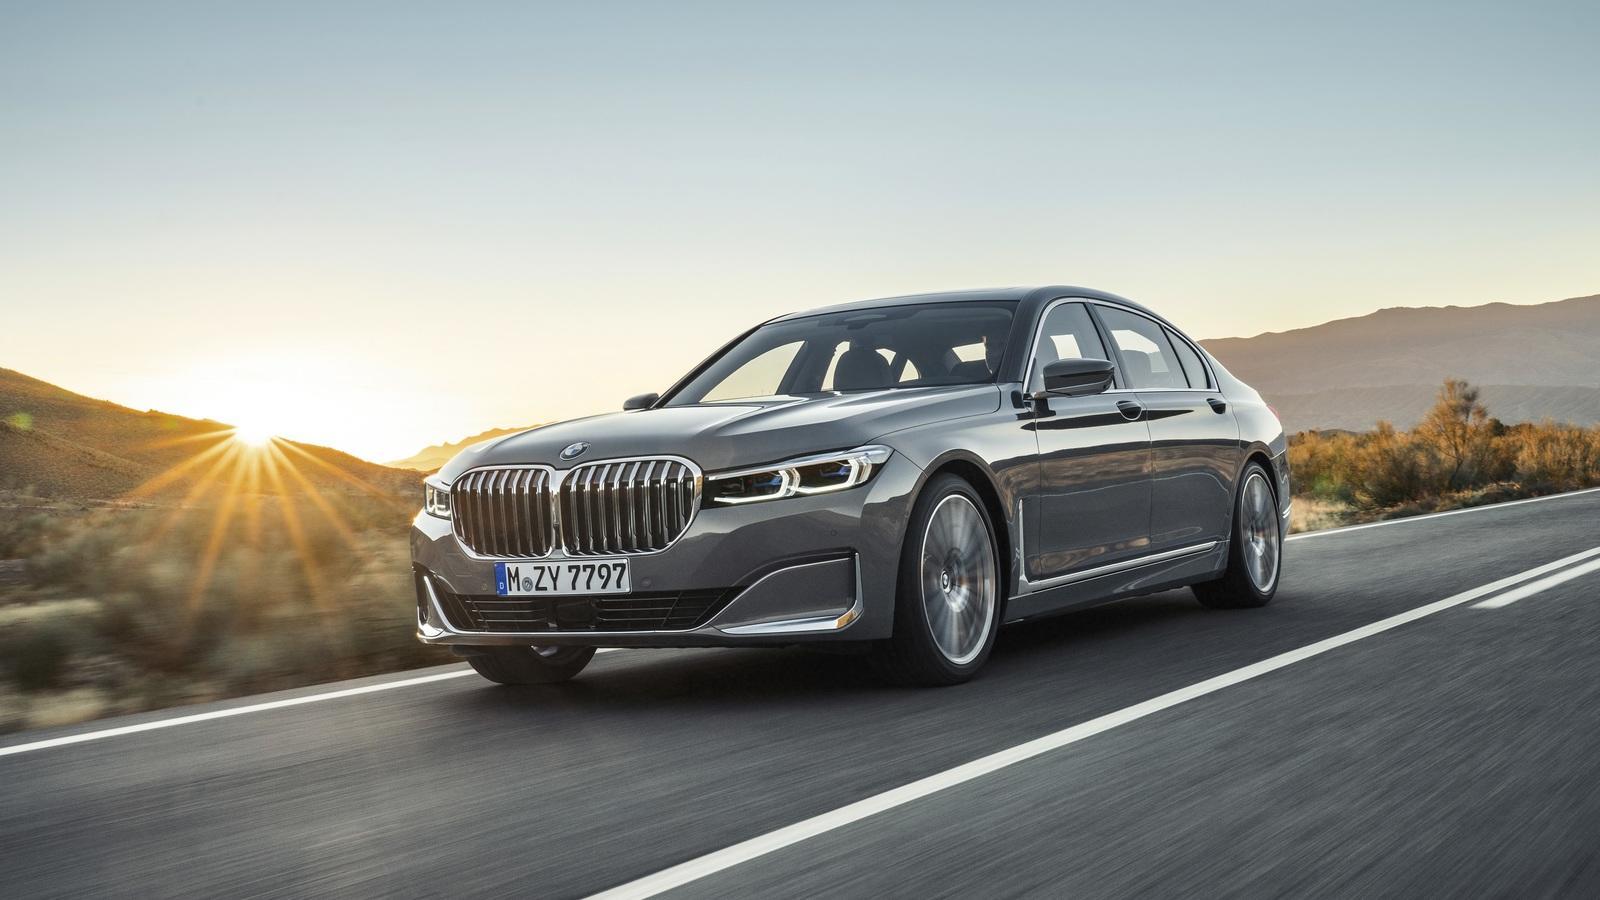 There's More To The 2020 BMW 7 Series Than That Massive Grille. Top